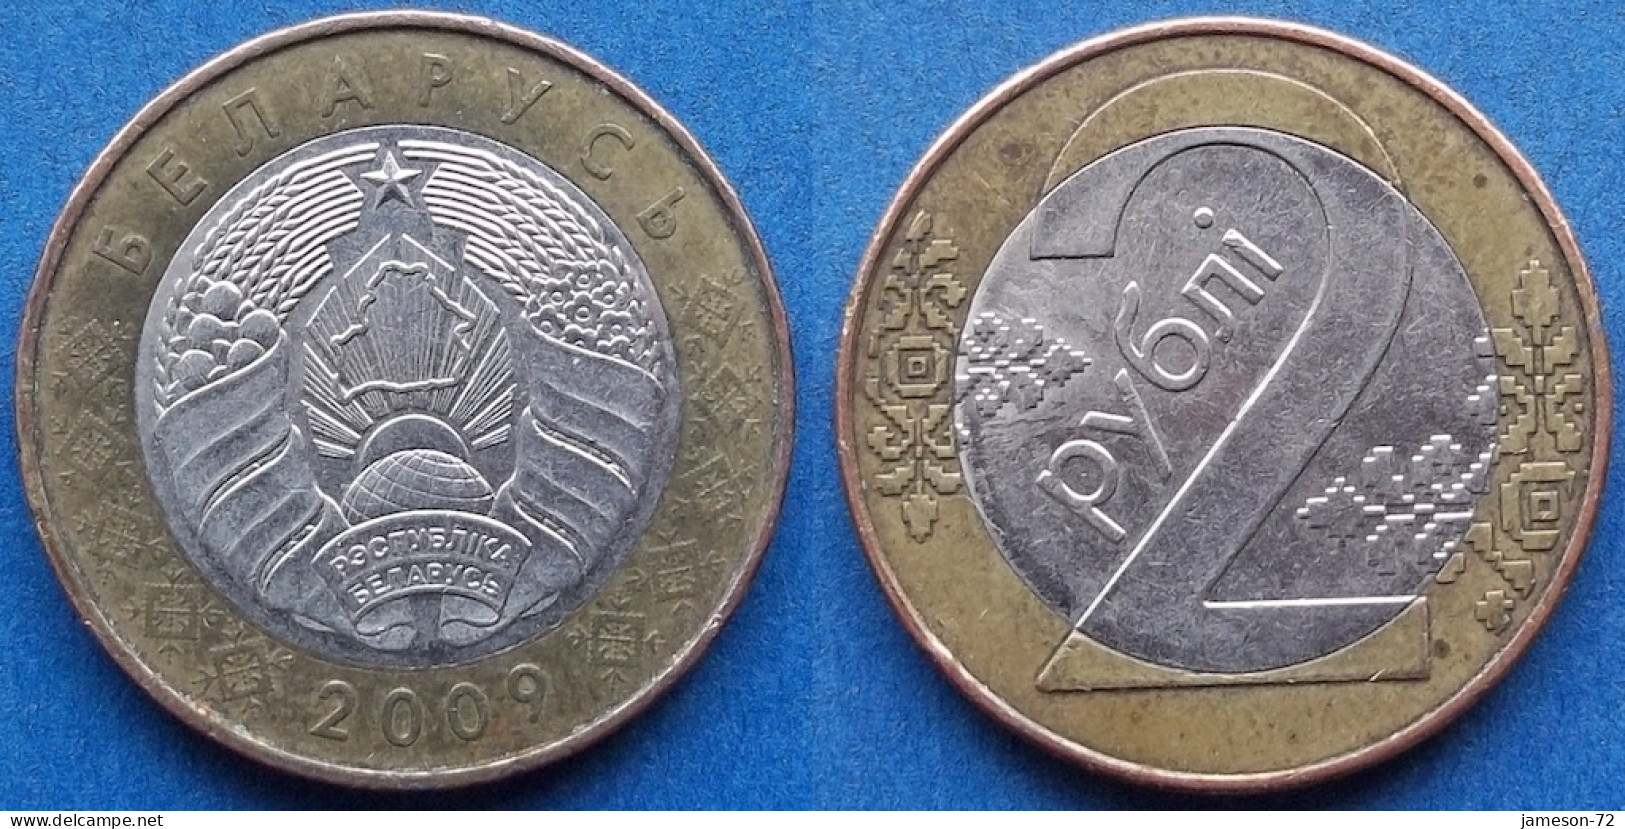 BELARUS - 2 Rouble 2009 KM# 568 Independent Republic (1991) - Edelweiss Coins - Belarus